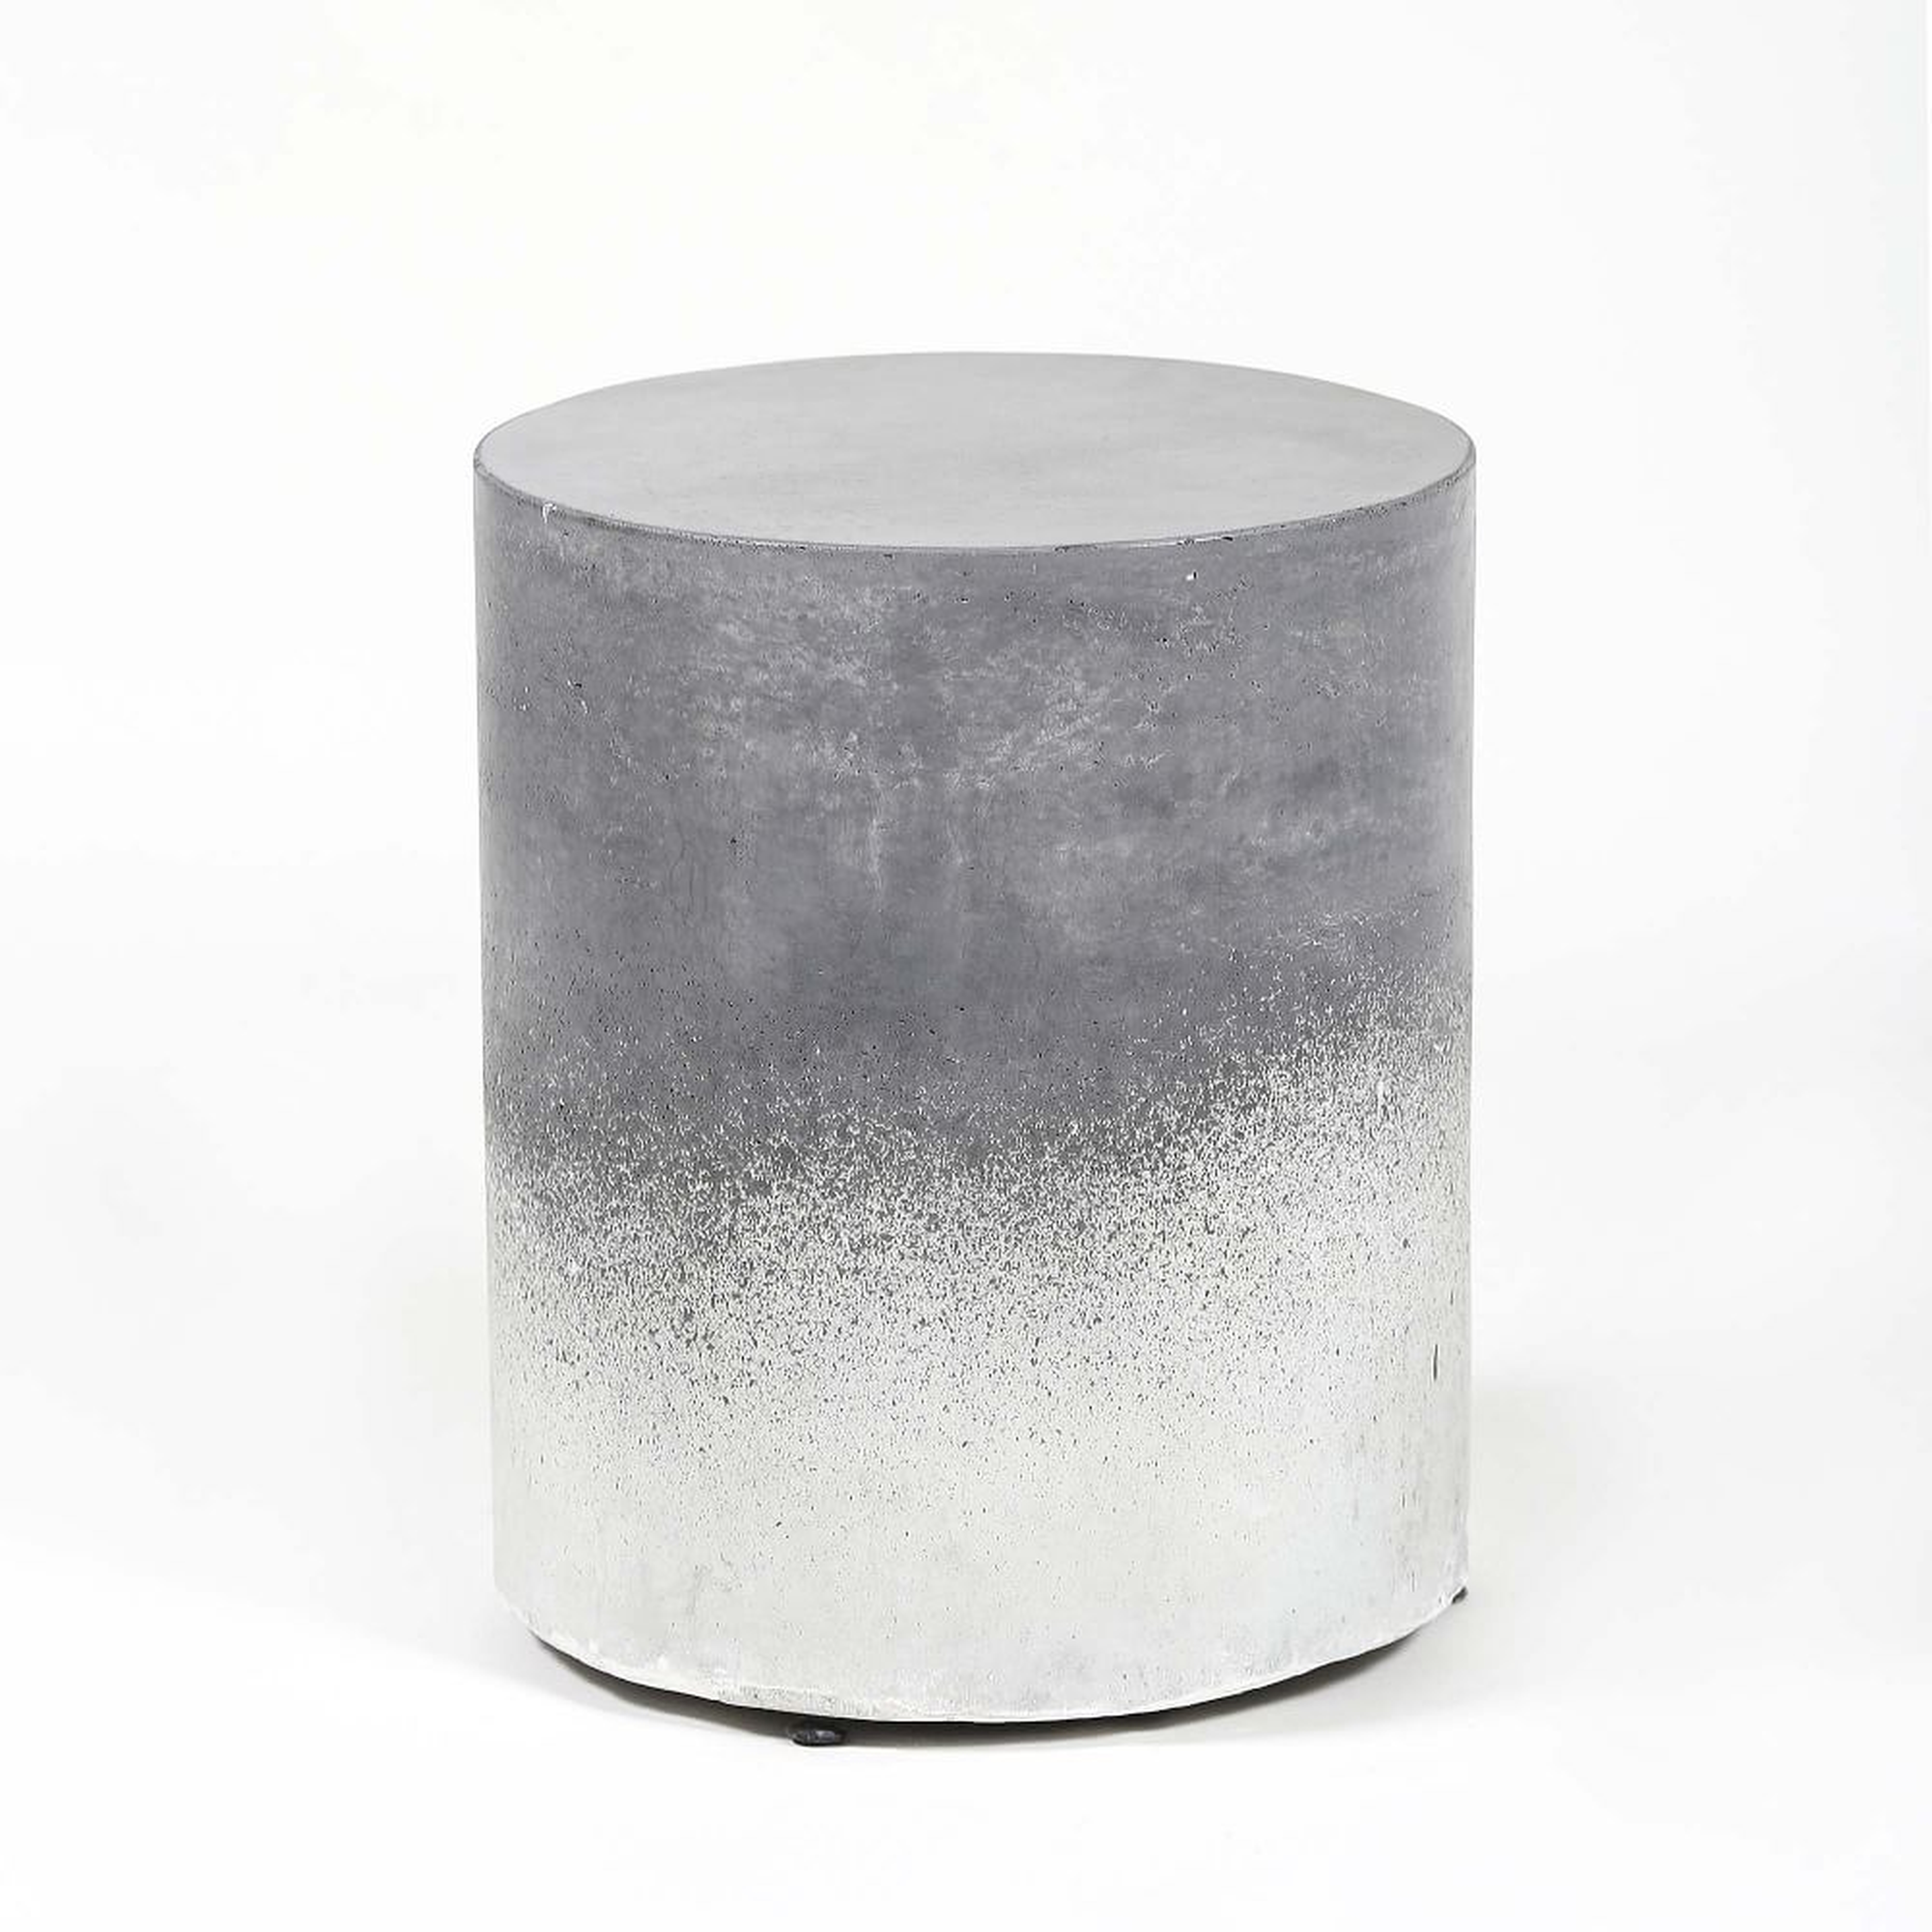 Manza Side Table Concrete Gray Side Table - West Elm